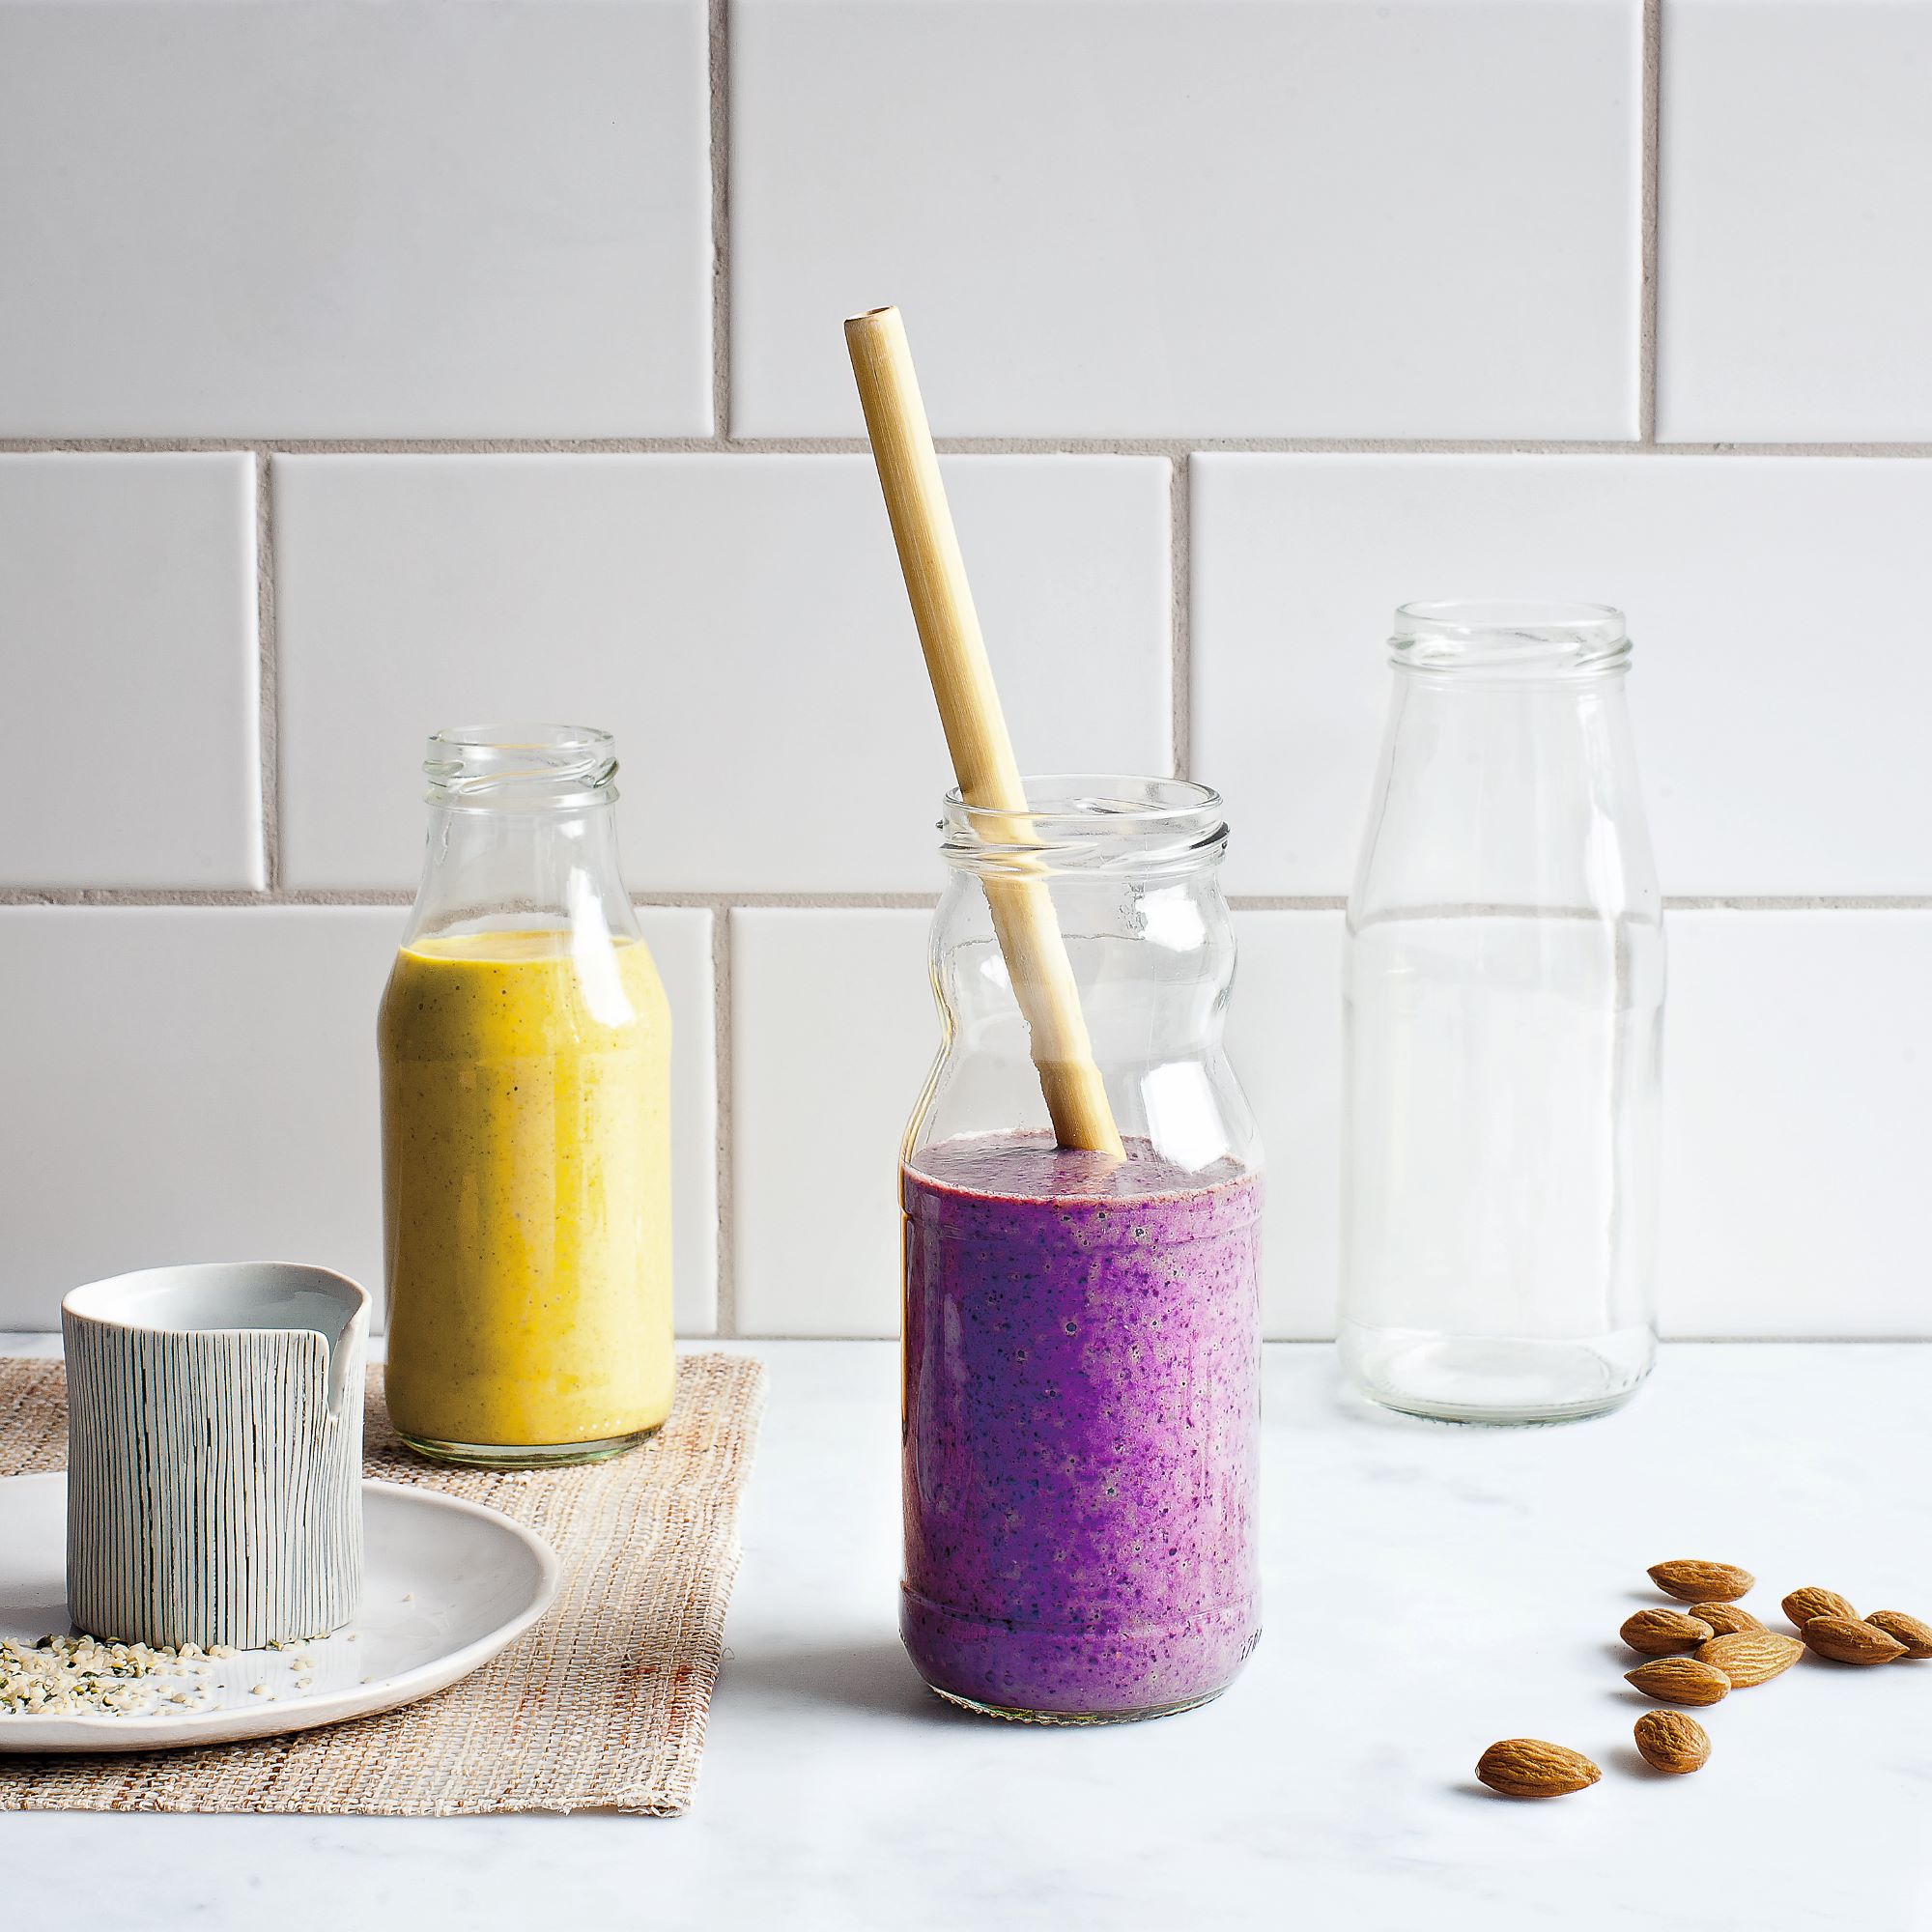 Tumeric smoothie (centre left, rear) from Raw